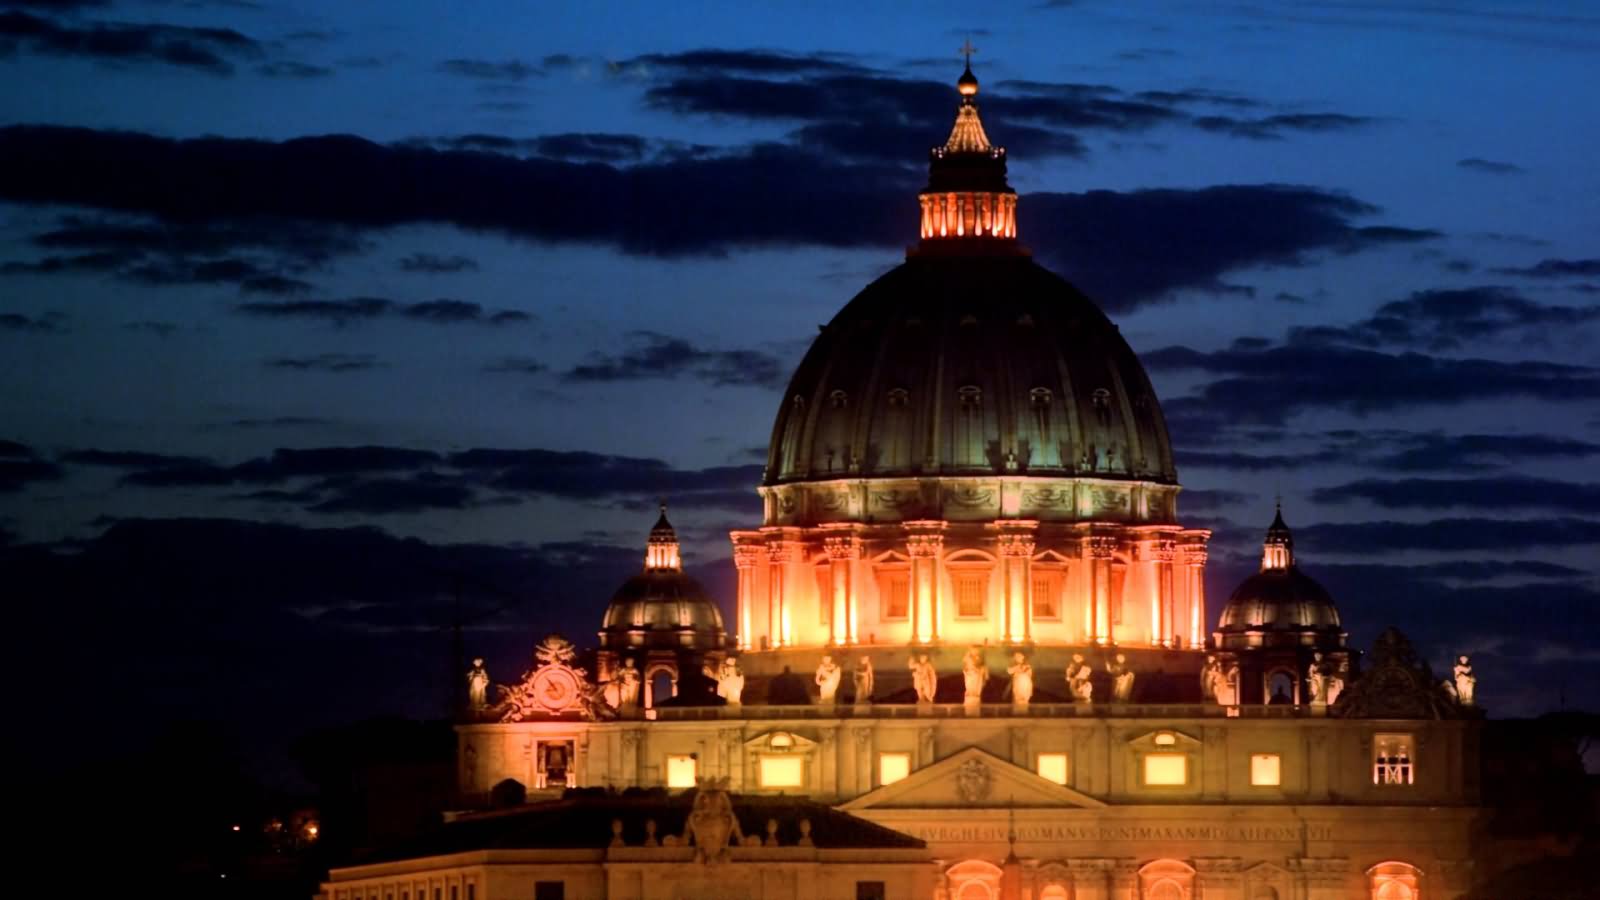 Dome Of St. Peter's Basilica At Night